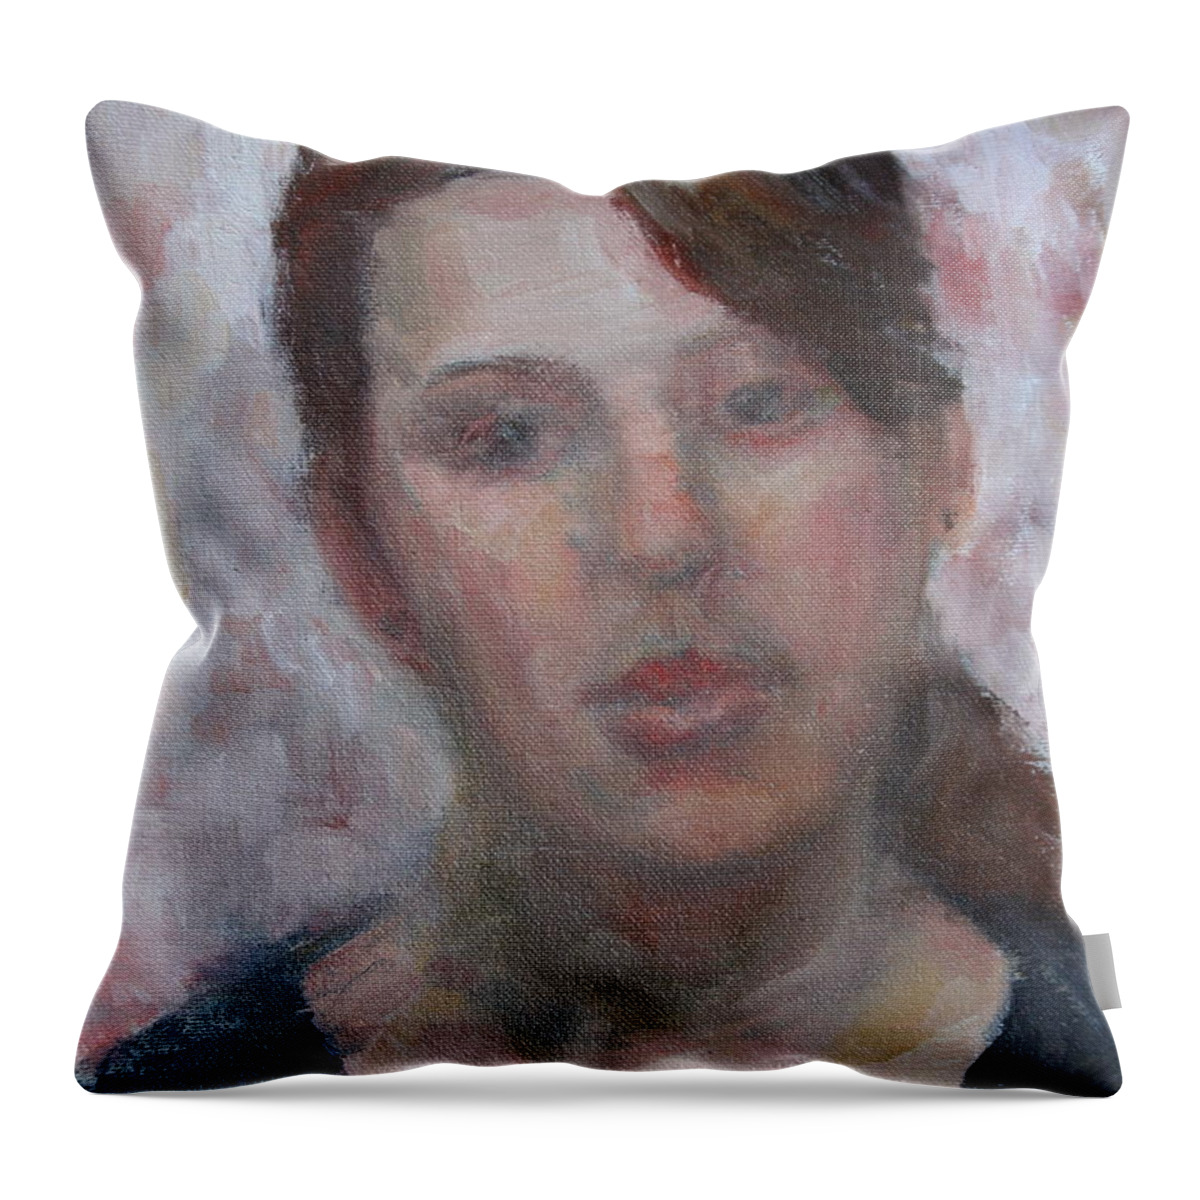 Quin Sweetman Throw Pillow featuring the painting Neisje by Quin Sweetman